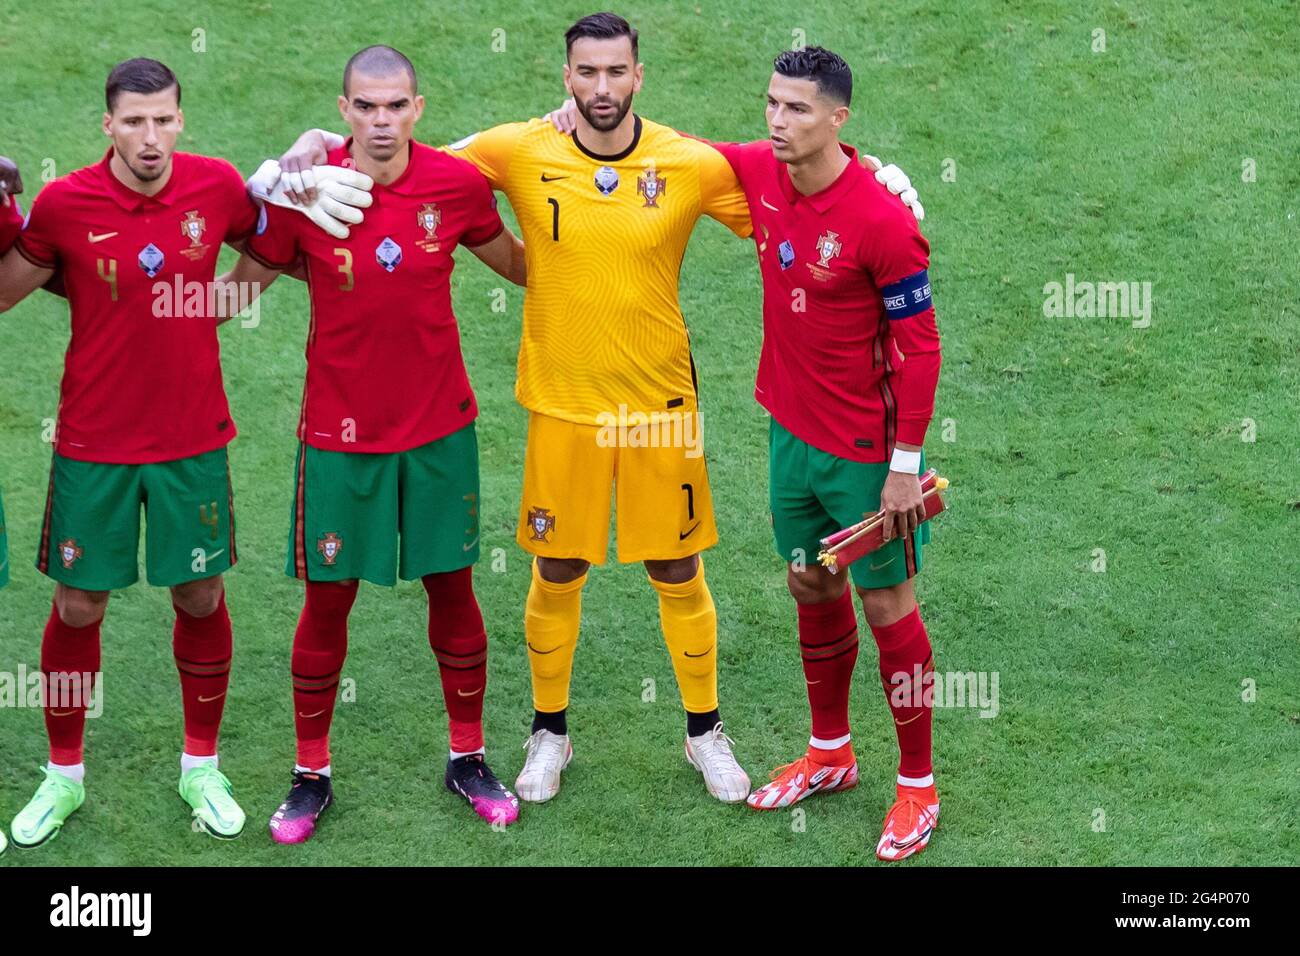 Munich, Germany. 19th June, 2021. Ruben Dias, Pepe, Rui Patricio and Cristiano Ronaldo are singing the national anthem during the UEFA EURO 2020 Championship Group F match between Portugal and Germany at Football Arena Munich. (Final score; Portugal 2:4 Germany) (Photo by Mikolaj Barbanell/SOPA Images/Sipa USA) Credit: Sipa USA/Alamy Live News Stock Photo